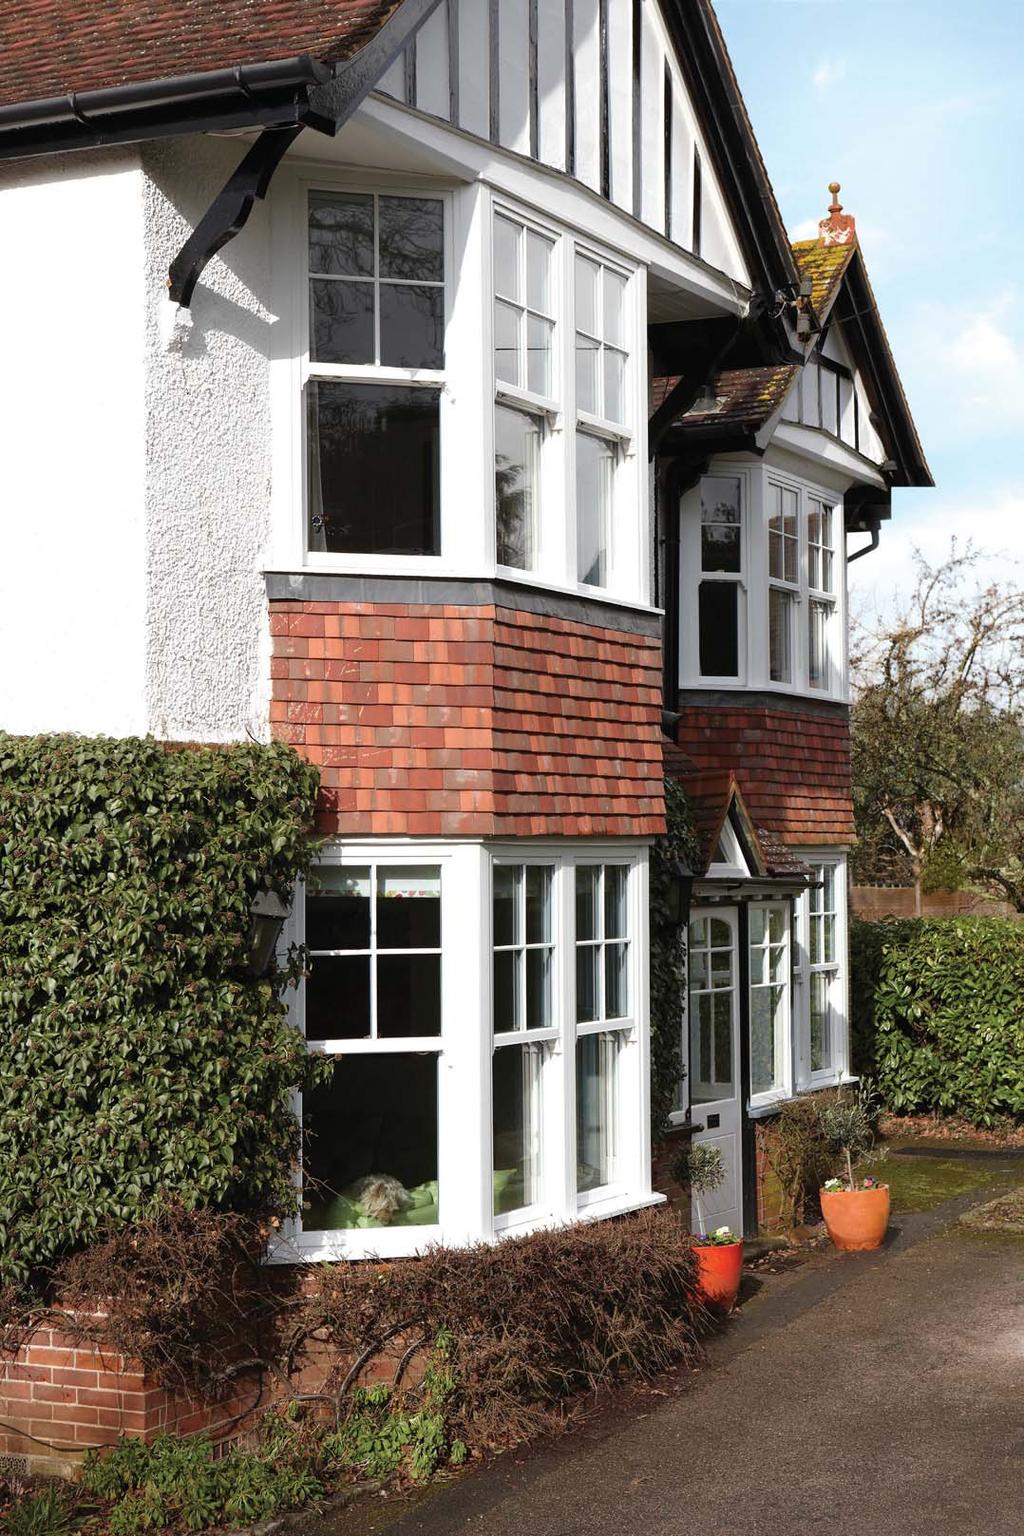 PERIOD STYLE REHAU is the premium worldwide brand supplying polymer-based windows, doors and conservatories to professional fabricators and installers.